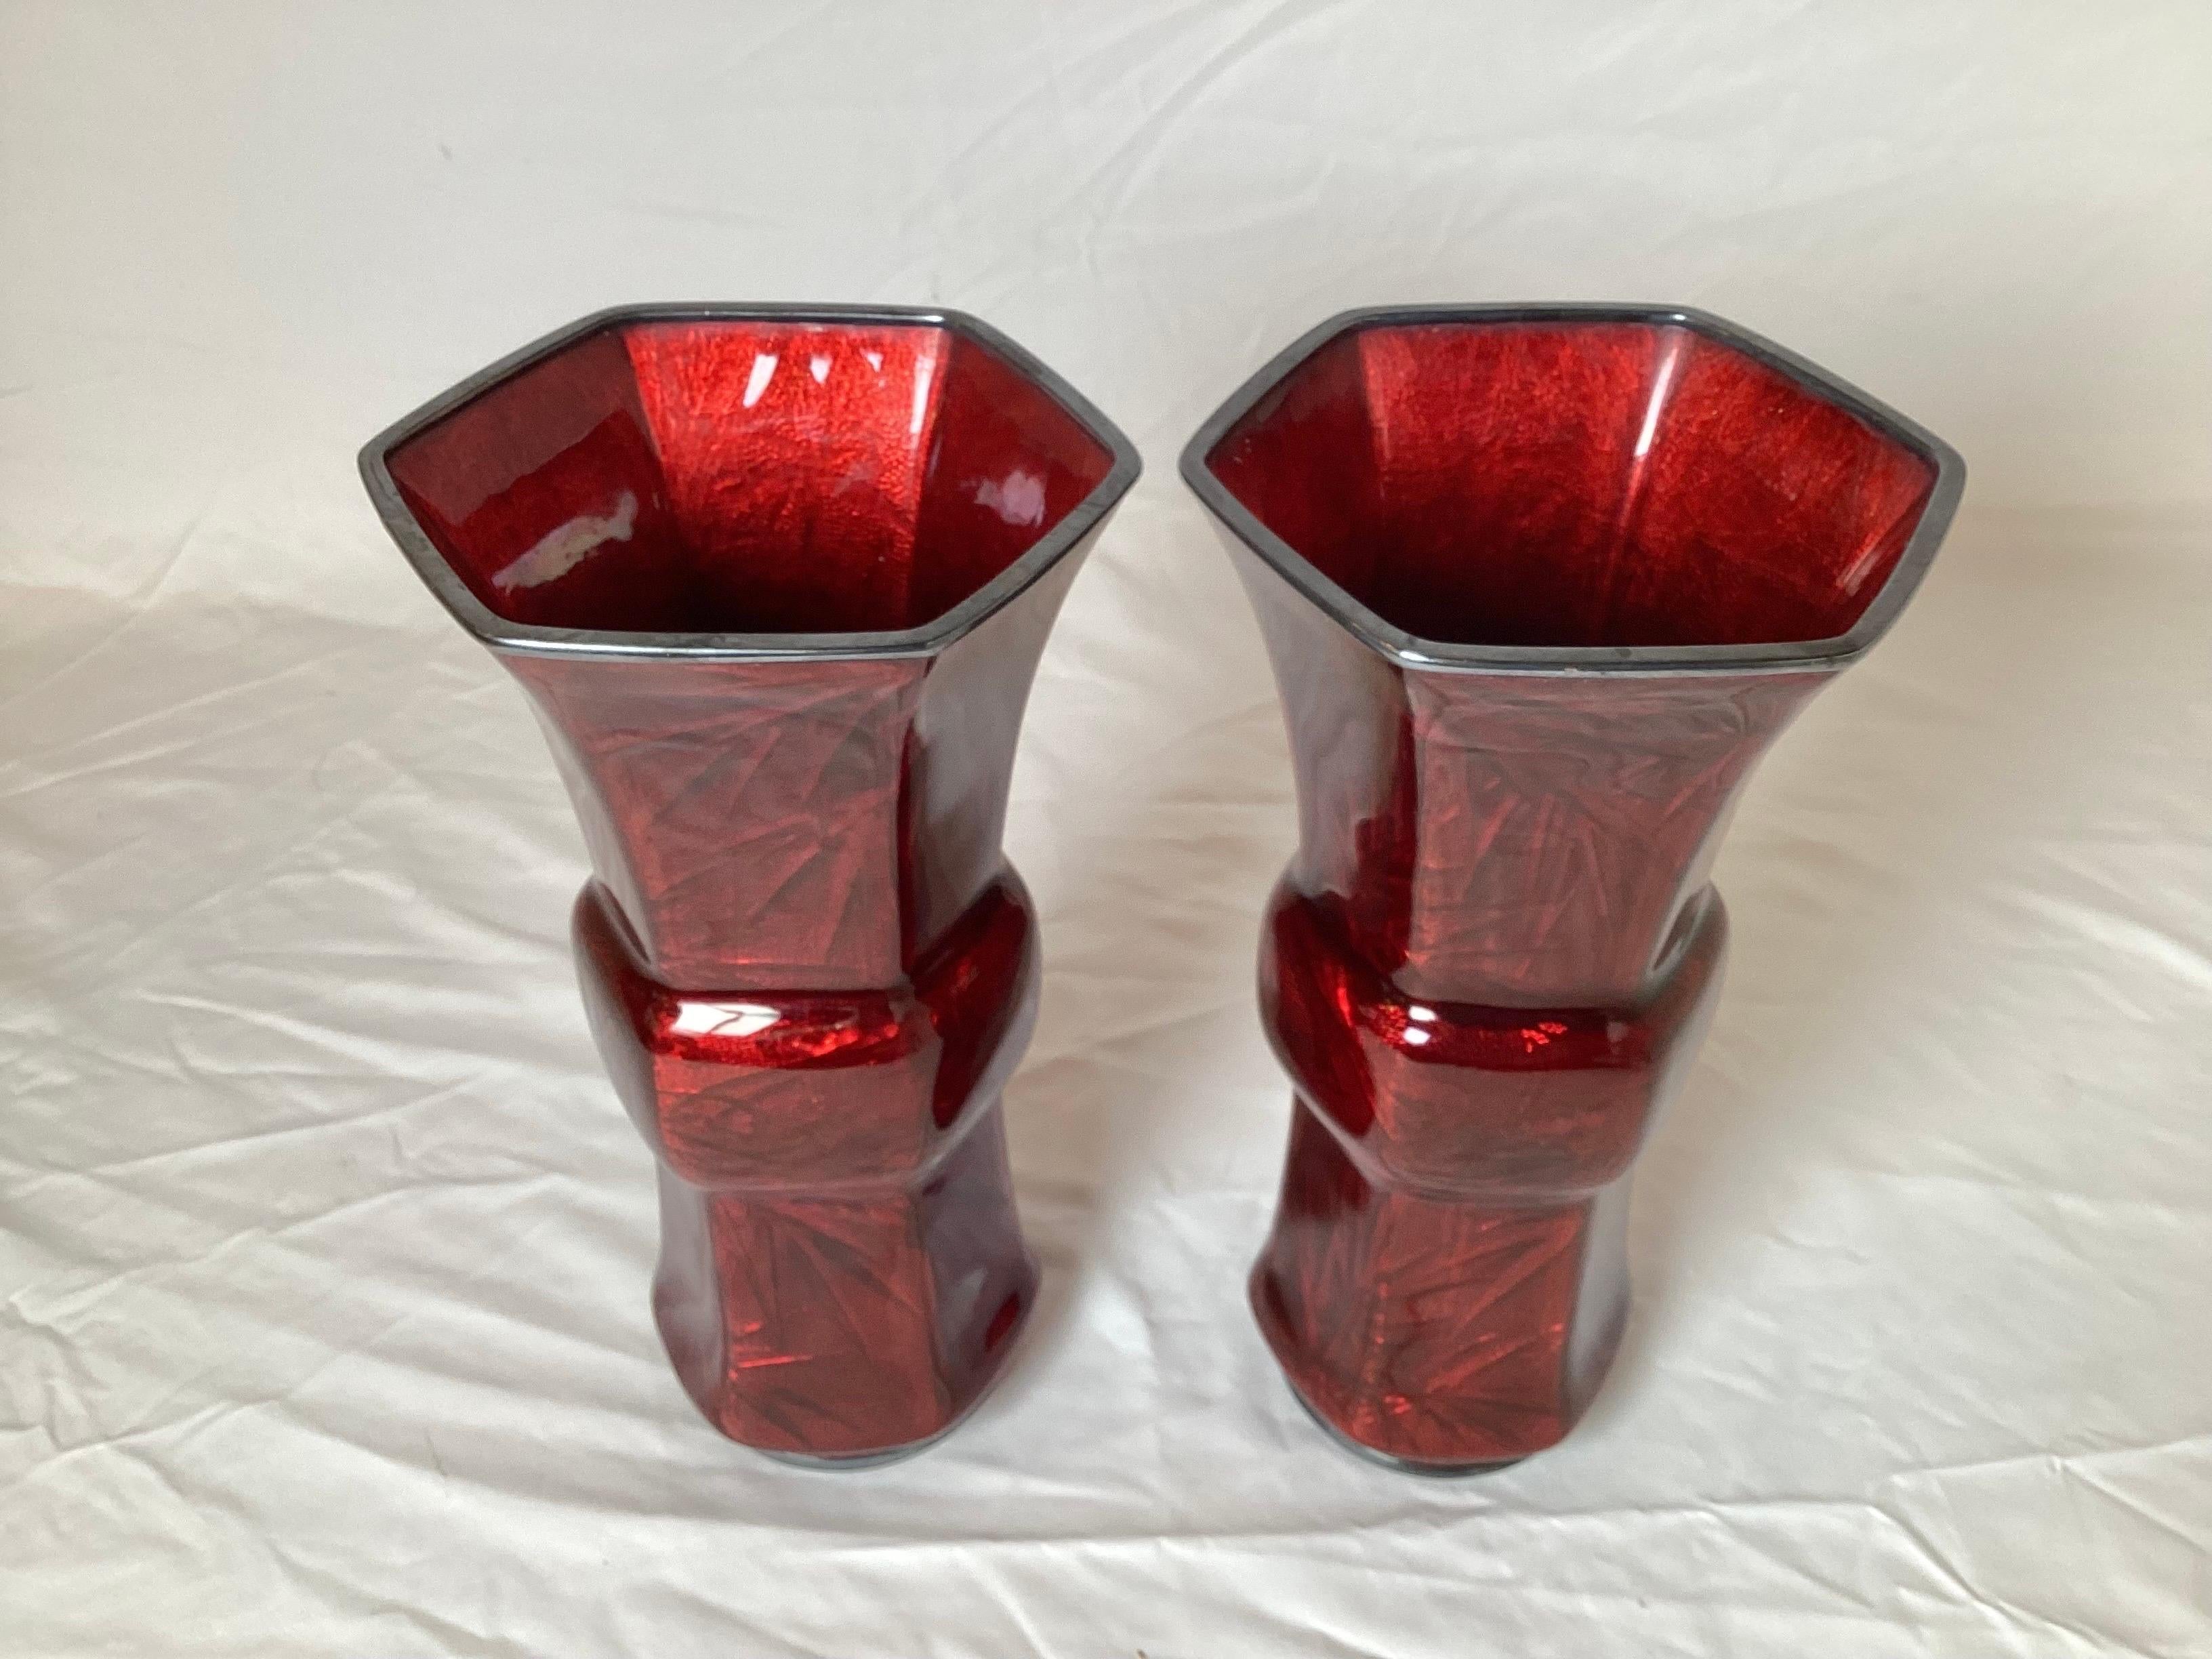 A pair of Japanese pigeon blood enamel cloisonné beaker vases with original storage wood box. The hexagonal shape with rich ruby color enamel over foil with silver rim at the top and base. Each with the ANDO GINBARI AKASUKA mark at the bottoms.